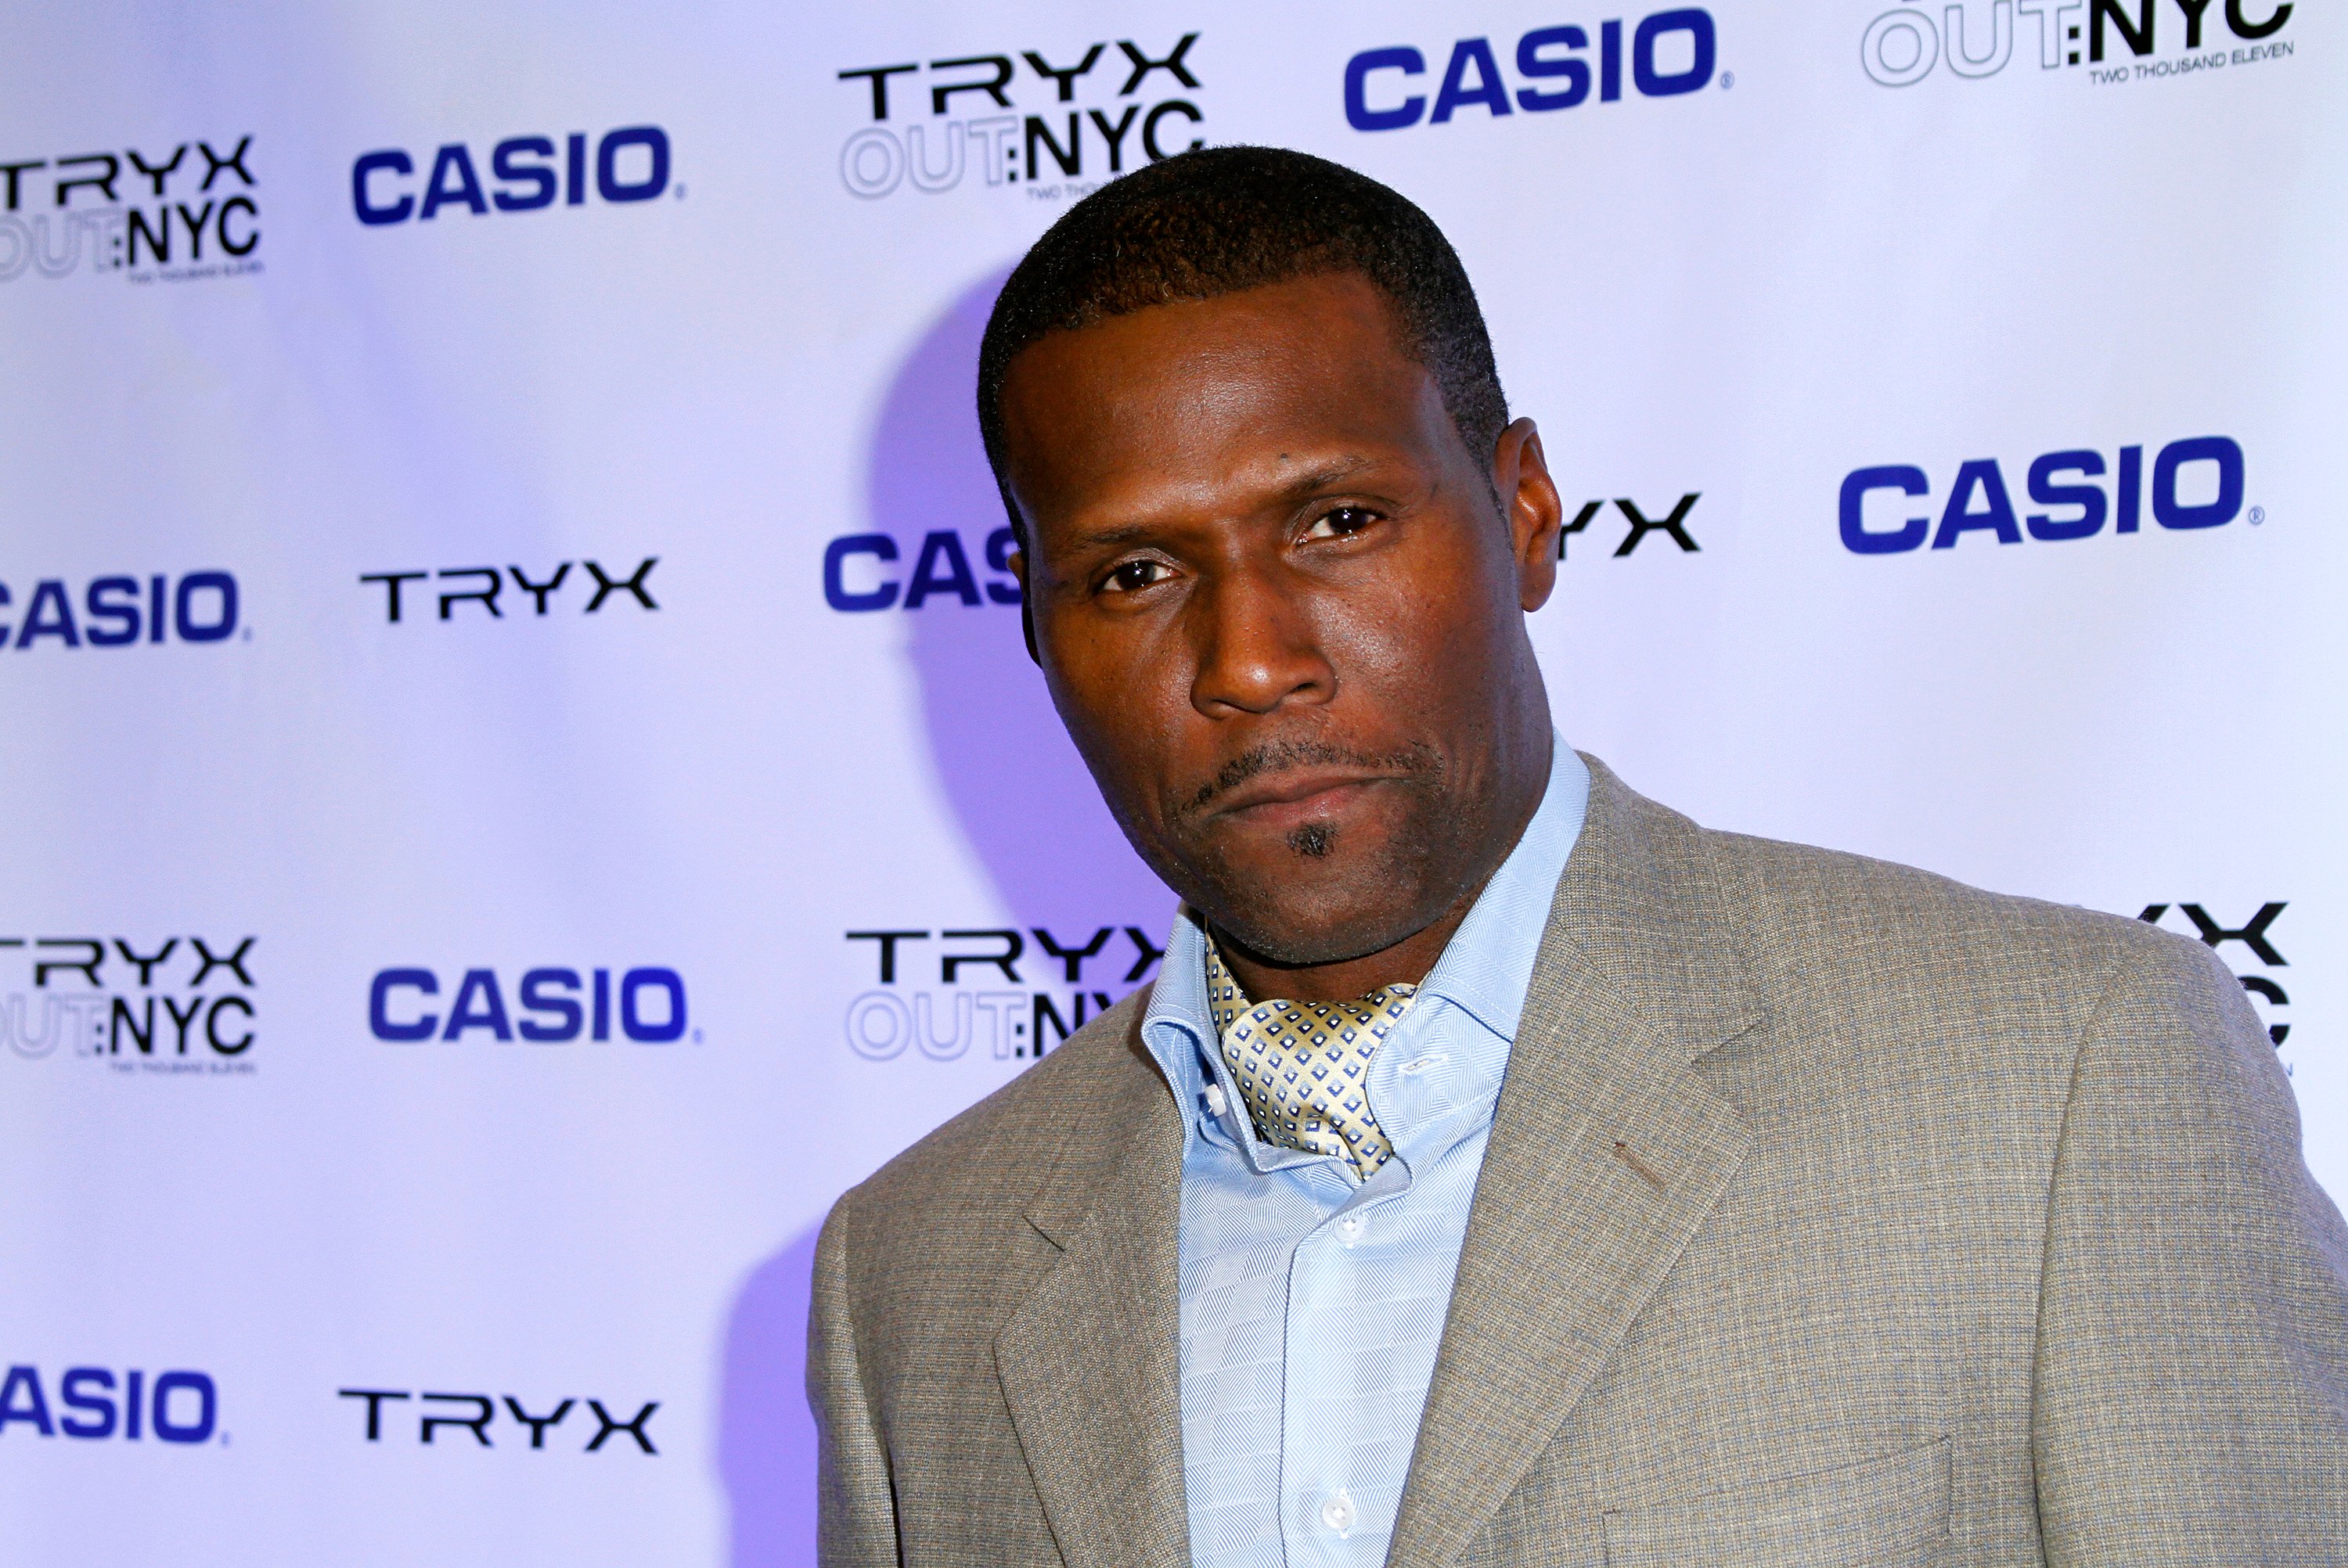 Curtiss Cook attends the Casio Tryx digital launch at the Best Buy Theatre